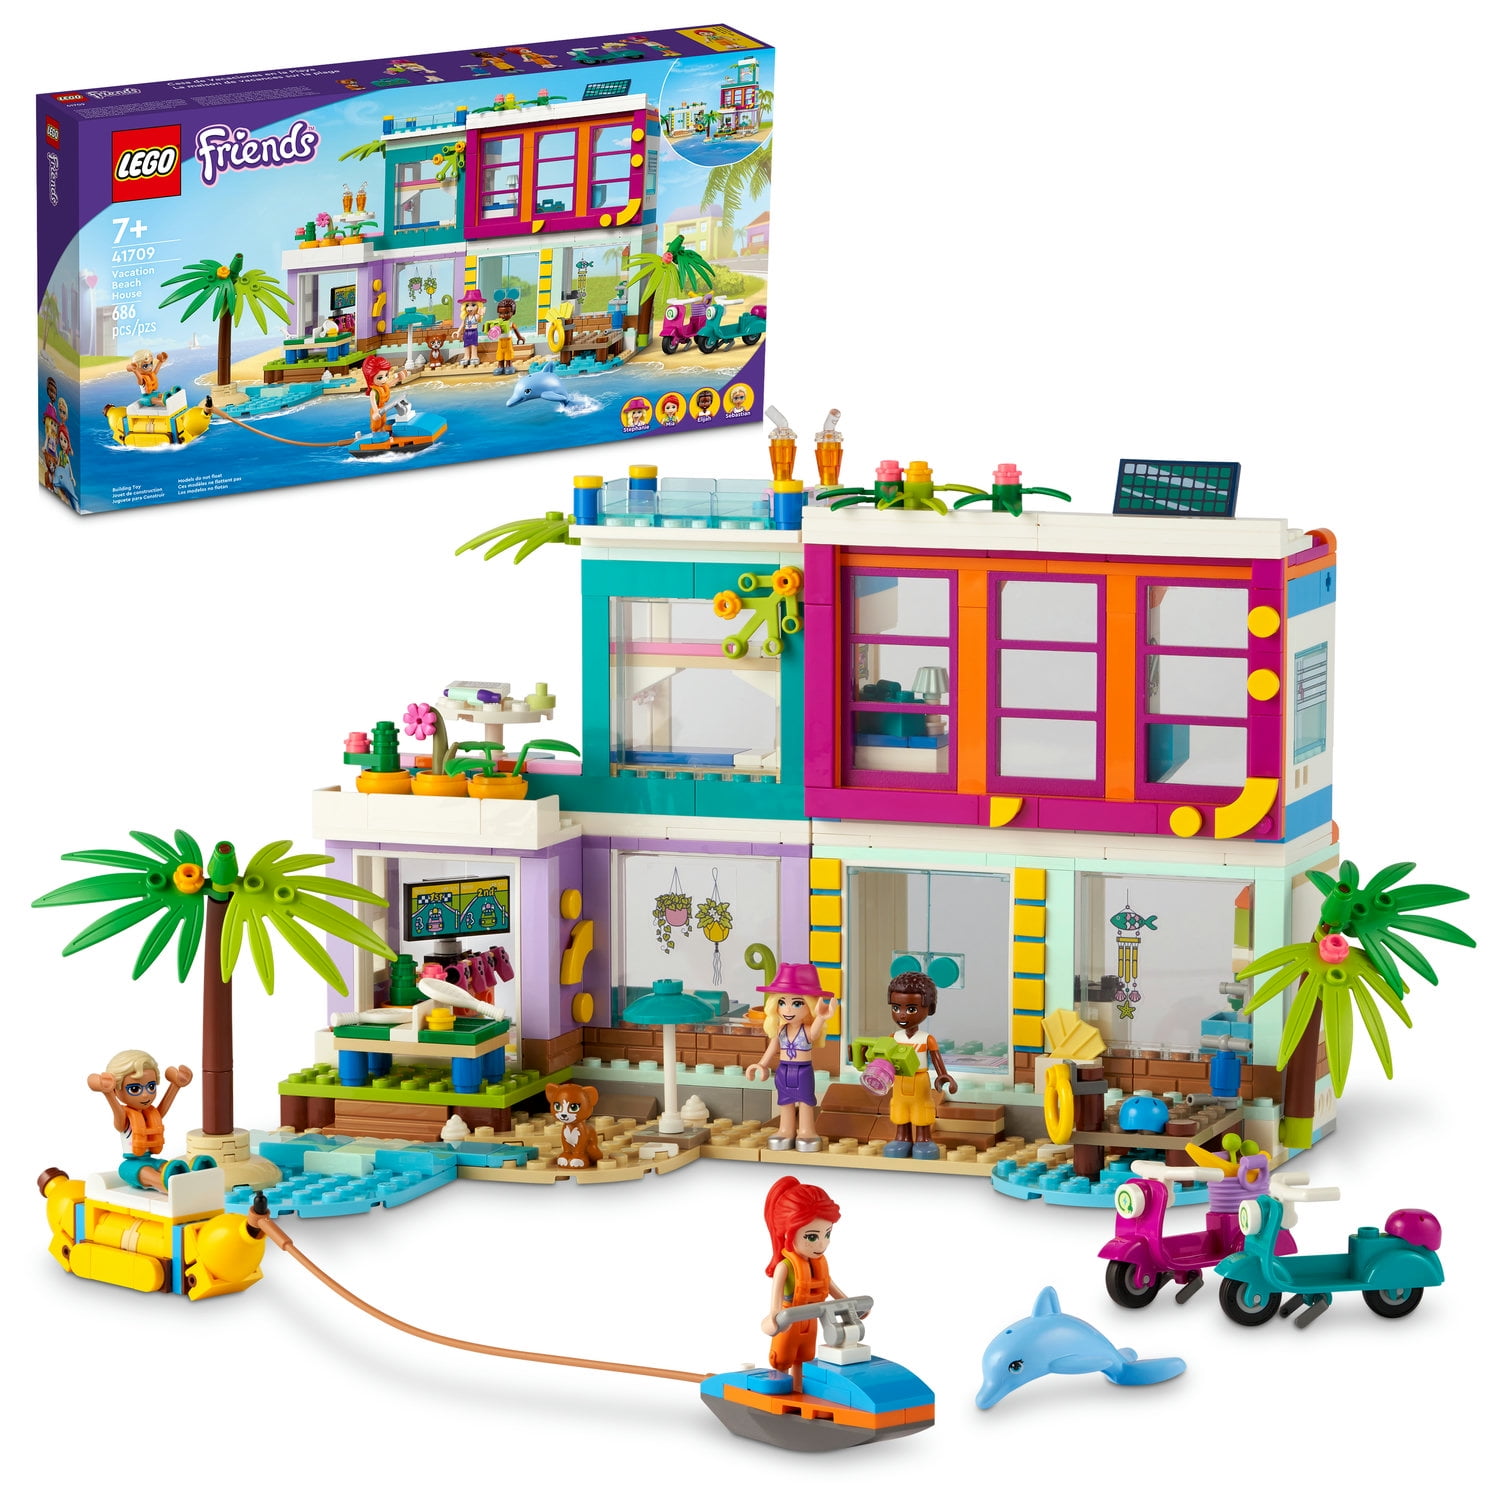 dagbog Uenighed amme LEGO Friends Vacation Beach House 41709 Building Kit; Gift For Kids Aged  7+; Includes a Mia Mini-Doll, Plus 3 More Characters and 2 Animal Figures  to Spark Hours of Imaginative Role Play (